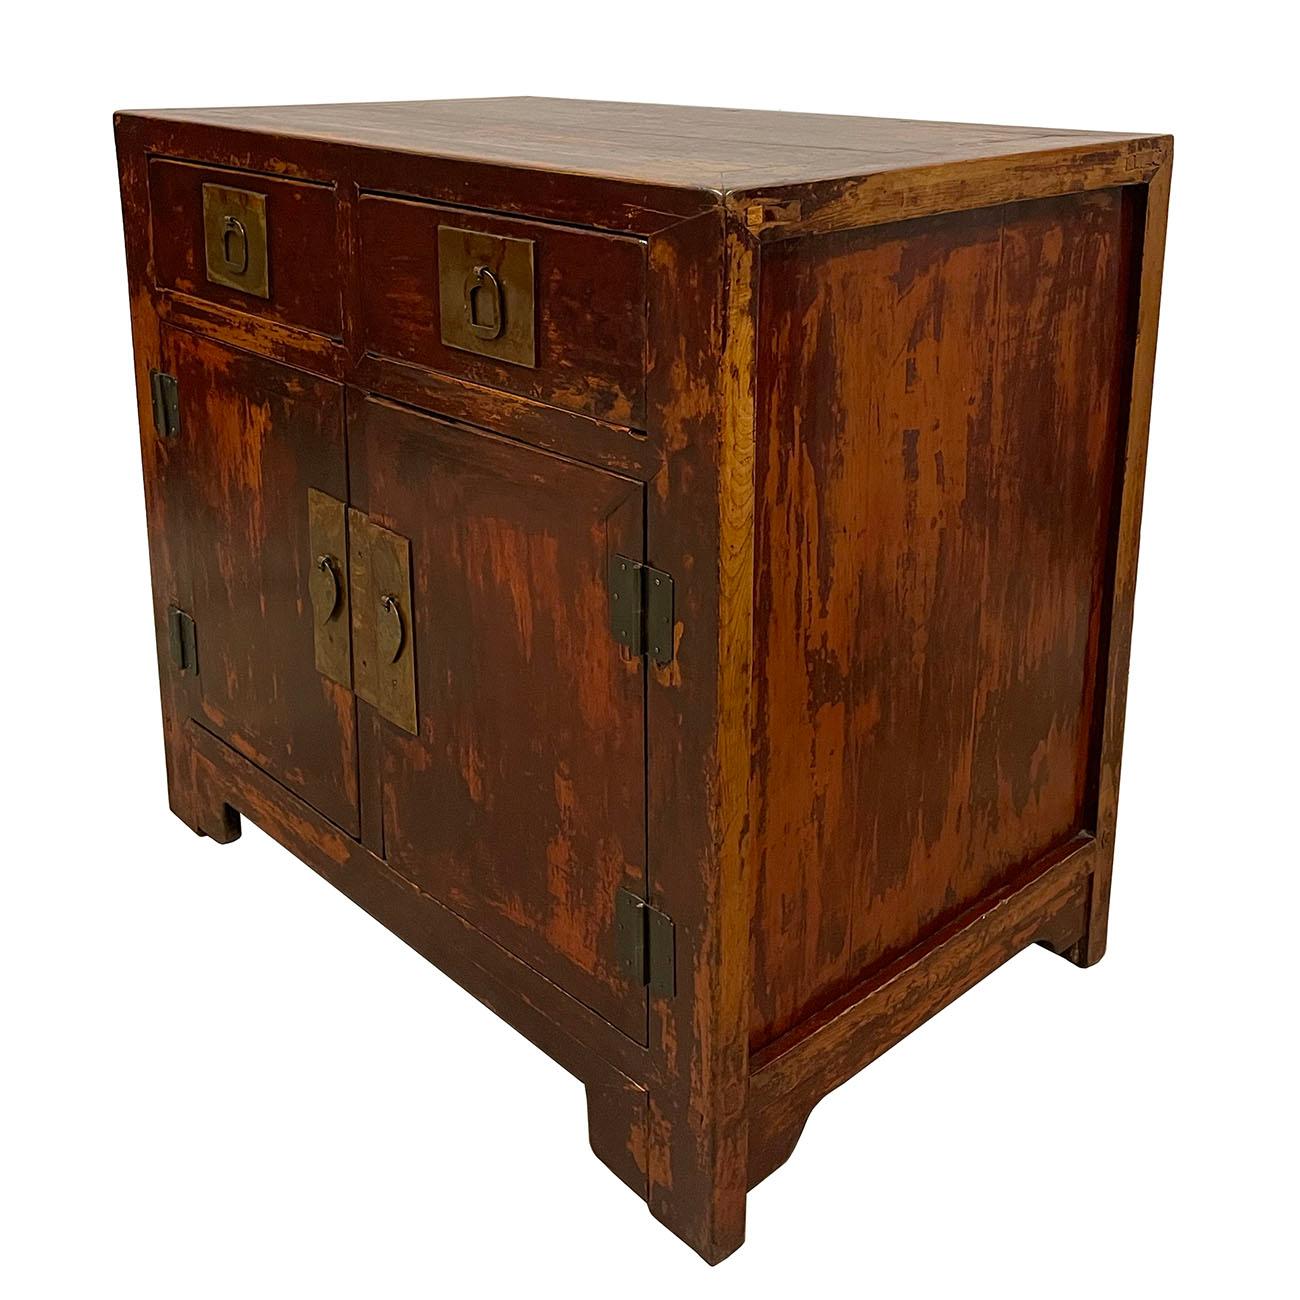 Size: 33.5in H x 34.5in W x 22in D
Drawer: 4.5in H x 12in W x 17in D
Door opening: 18in H x 29in W
Origin: China
Circa: 1850 - 1900
Material: Wood
Condition: Solid wood construction, Well balance, sturdy, normal age wear.

Description: This